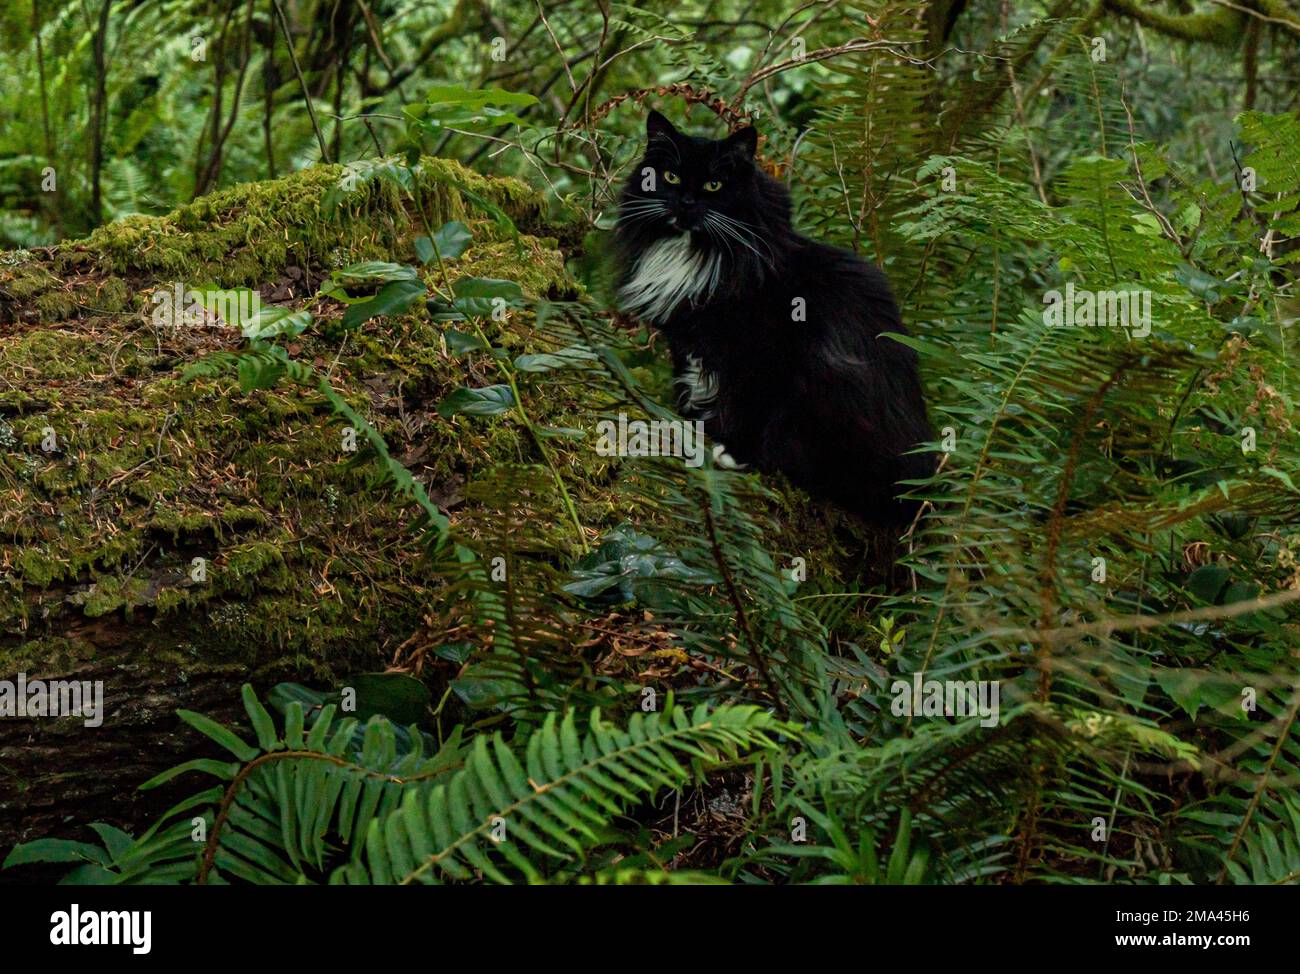 Black cat on a mossy log, with ferns and forest.  Green contrasts with cute cat, longhair tuxedo. Stock Photo